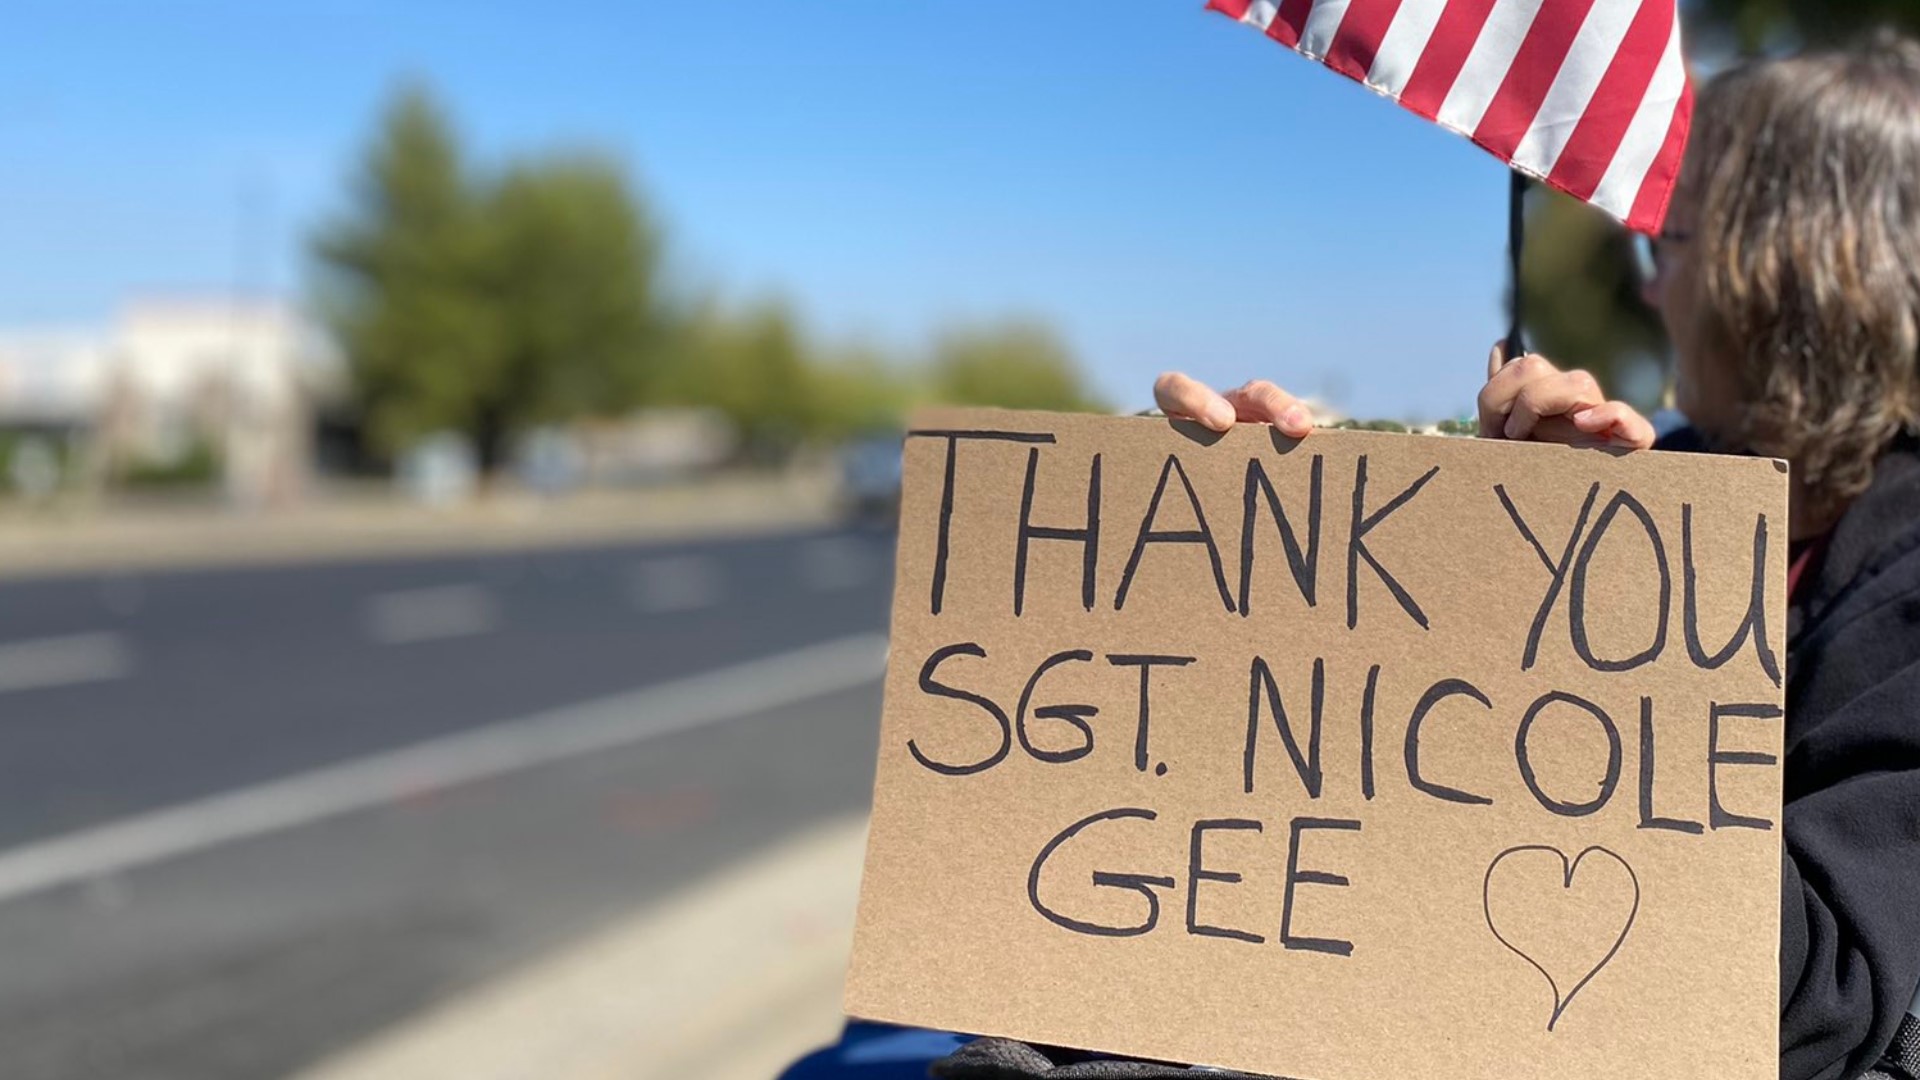 Dozens of community members from Roseville and beyond lined sidewalks holding American flags and signs to honor the service and sacrifice of USMC Sgt. Nicole Gee.